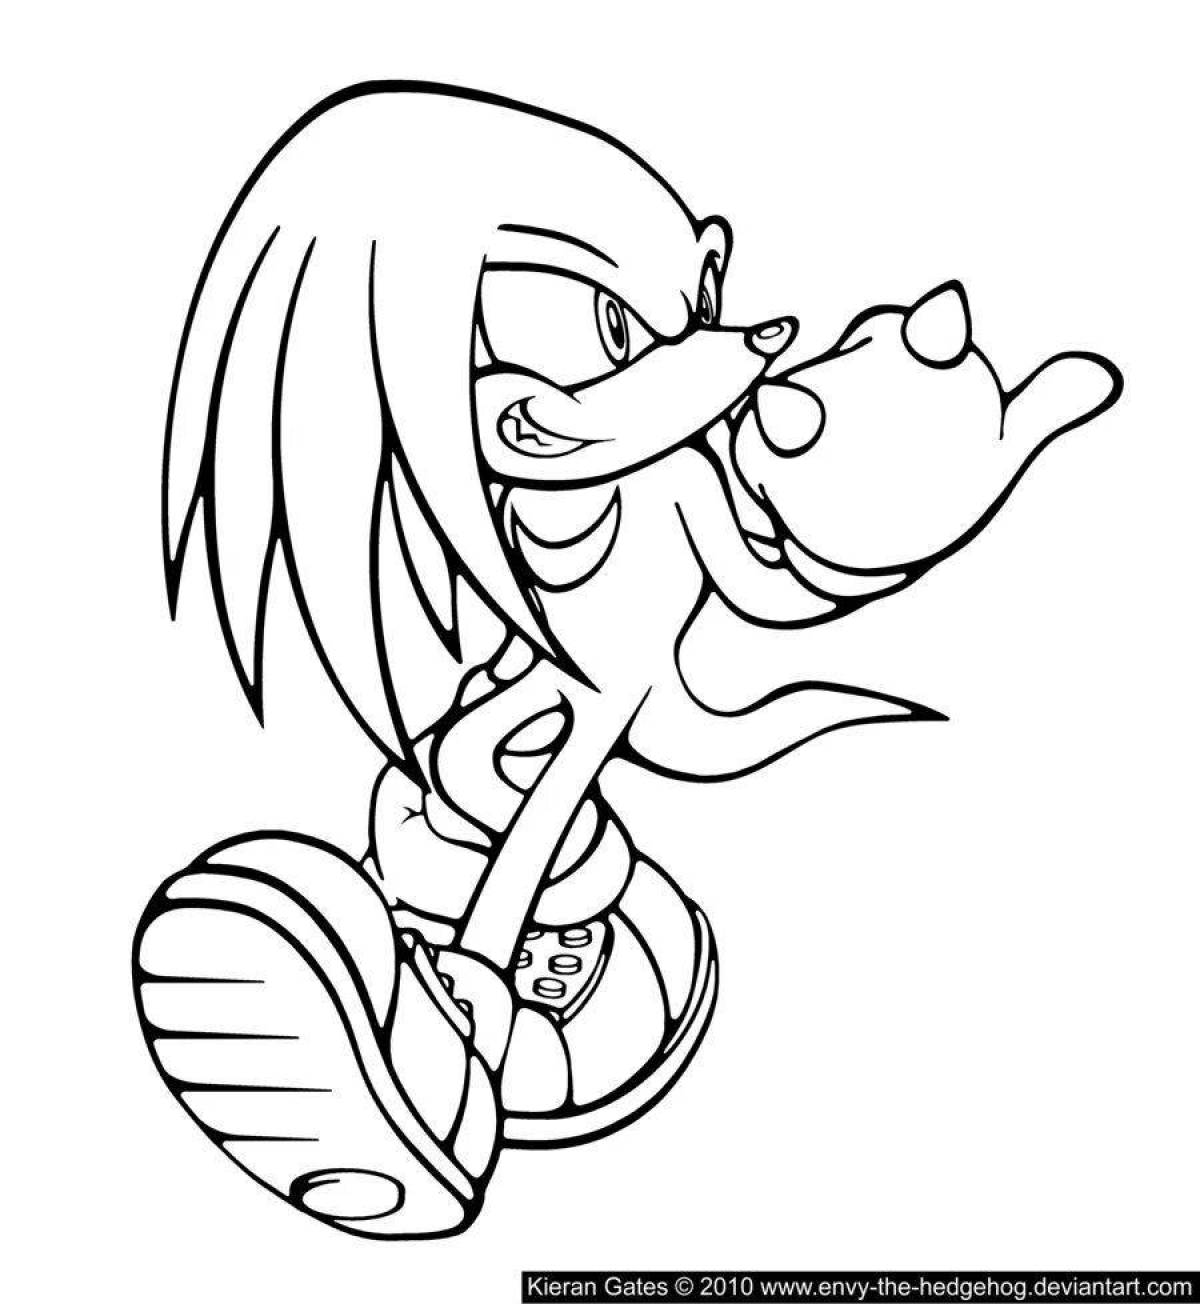 Animated red friend coloring page